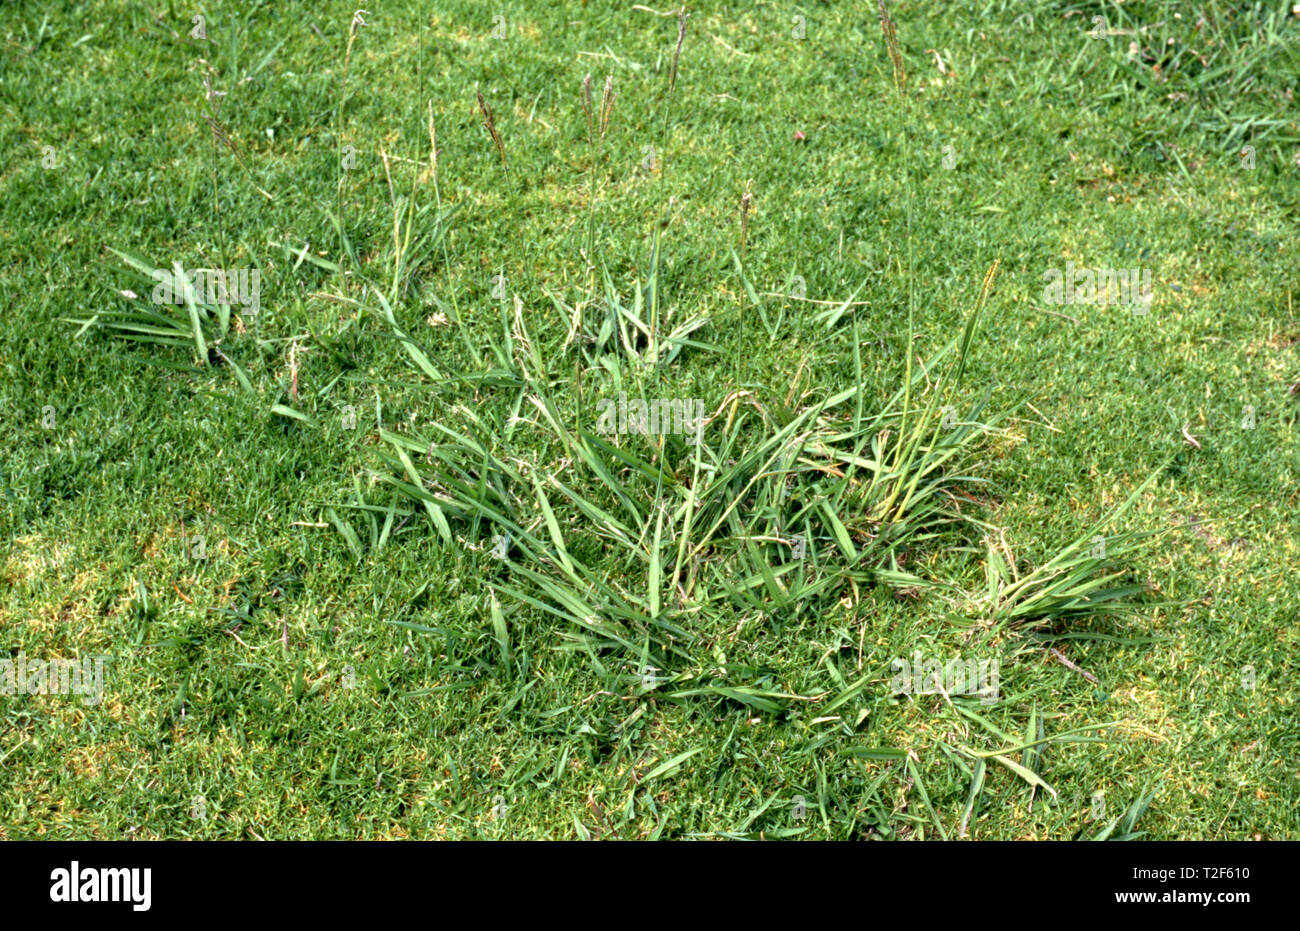 PASPALUM GROWING IN LAWN, COFFS HARBOUR, NEW SOUTH WALES, AUSTRALIA. Stock Photo